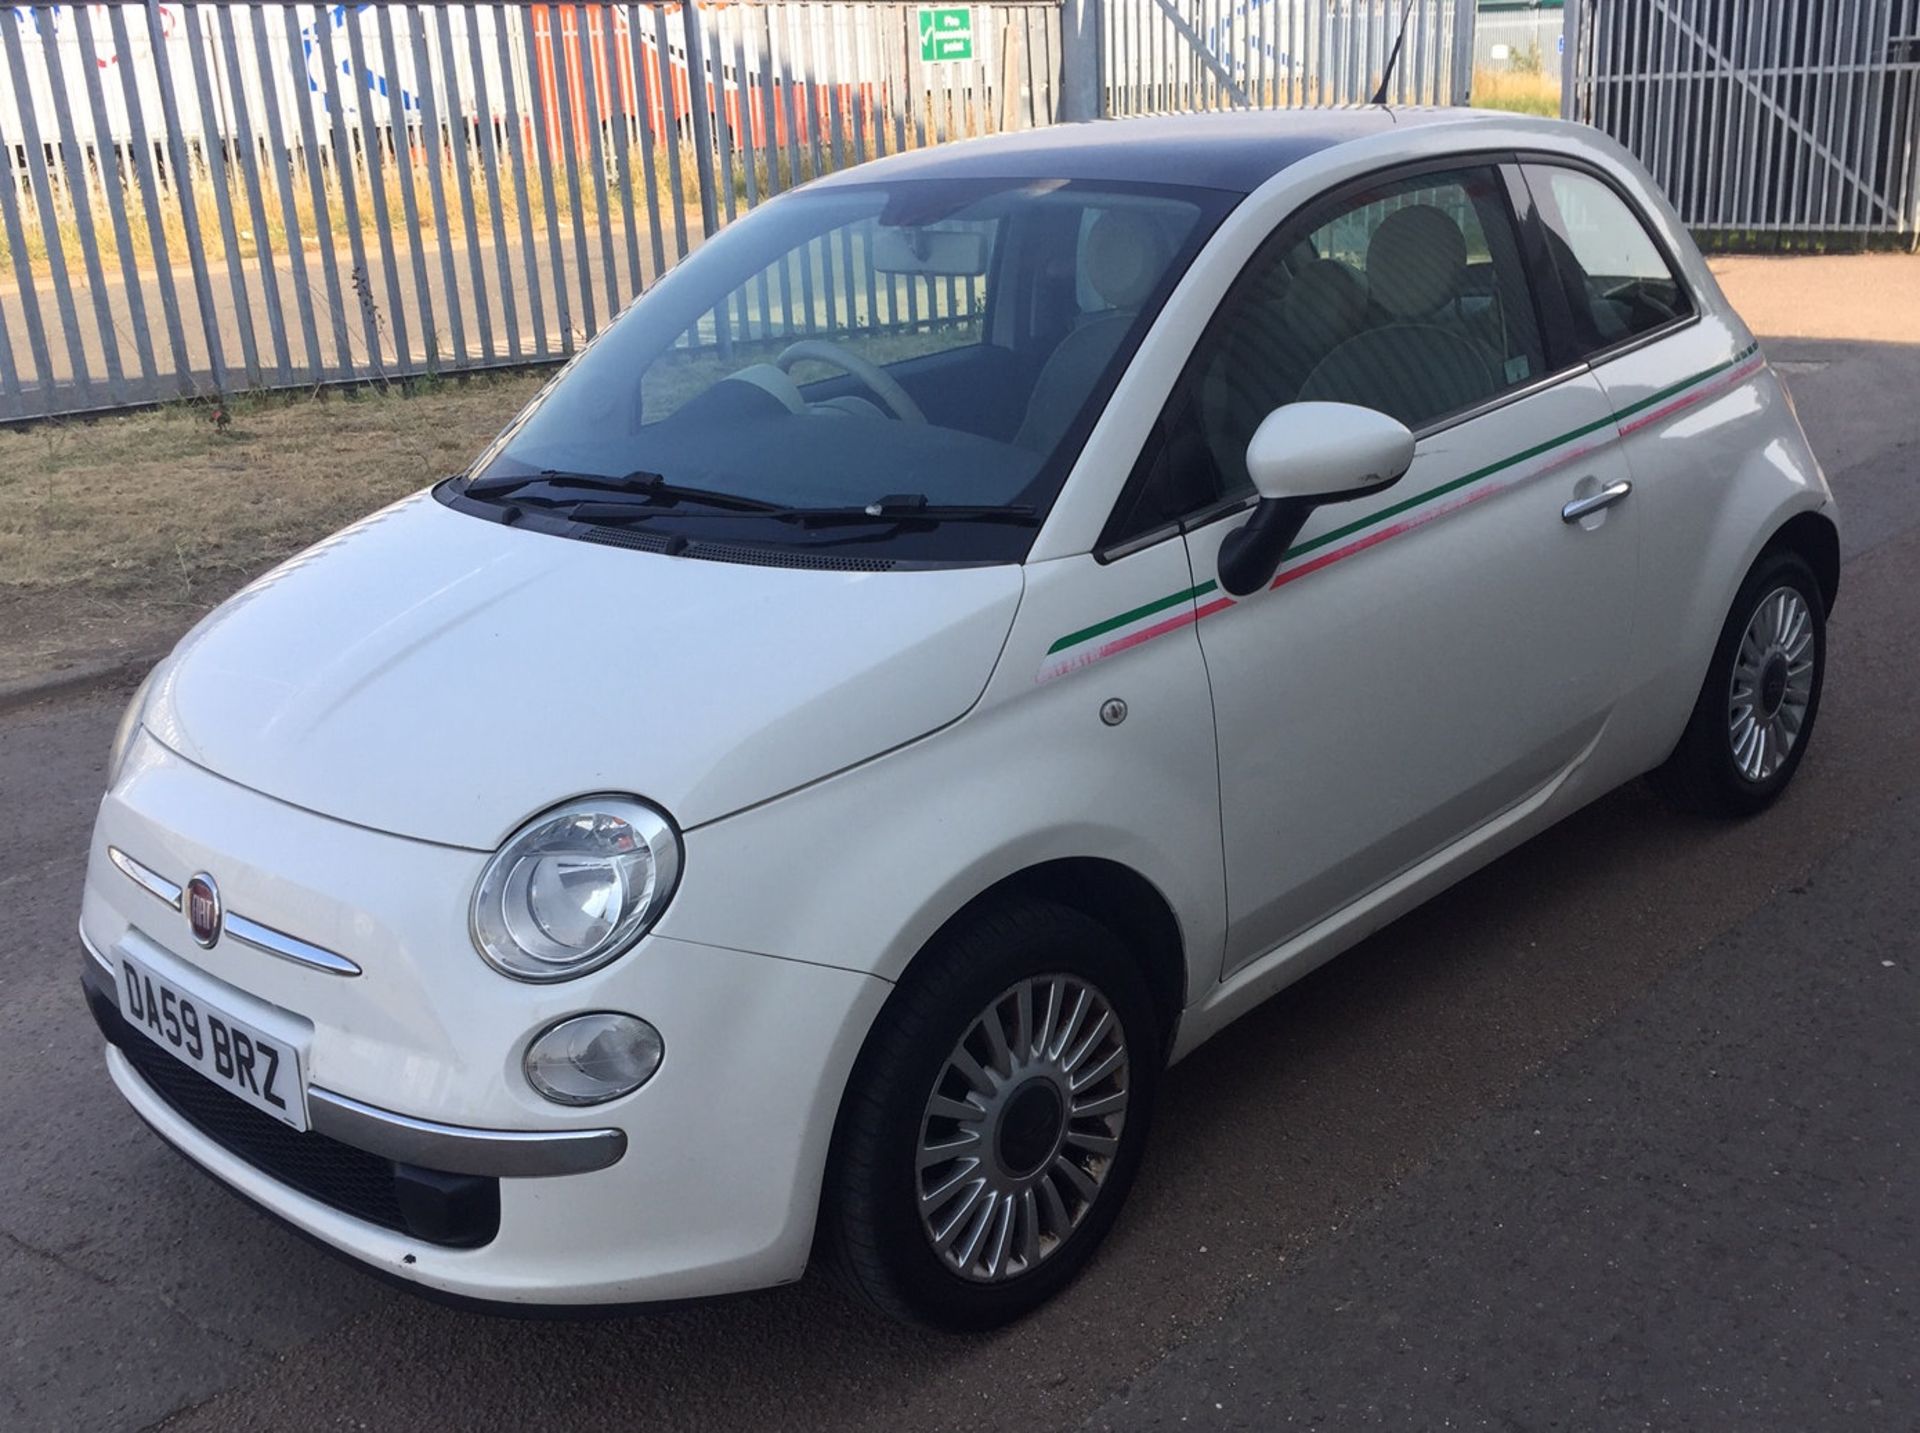 2009 Fiat 500 1.2 Lounge 3 Dr Hatchback - CL505 - NO VAT ON THE HAMMER - Location: Corby, Northampto - Image 6 of 12